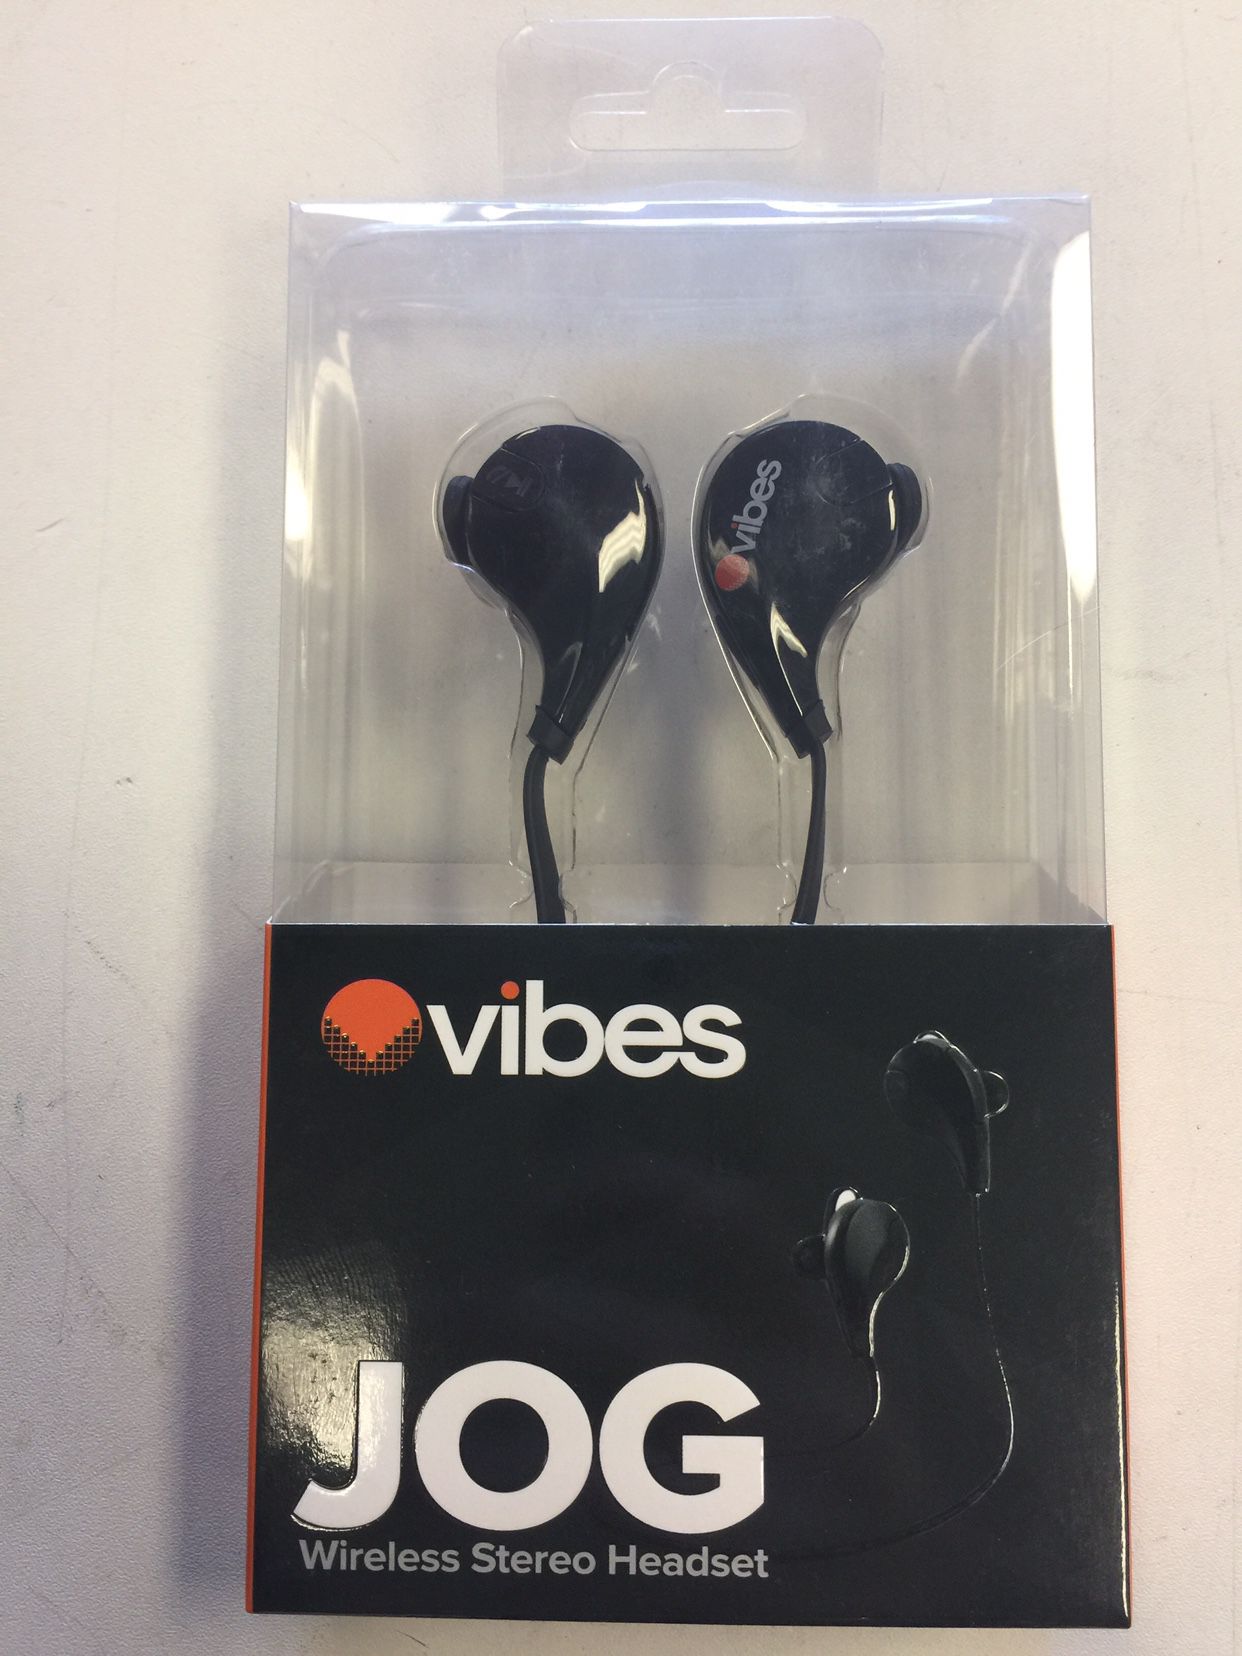 Vibes JOG Wireless Stereo Headset NEW in the box never opened Great Christmas Present